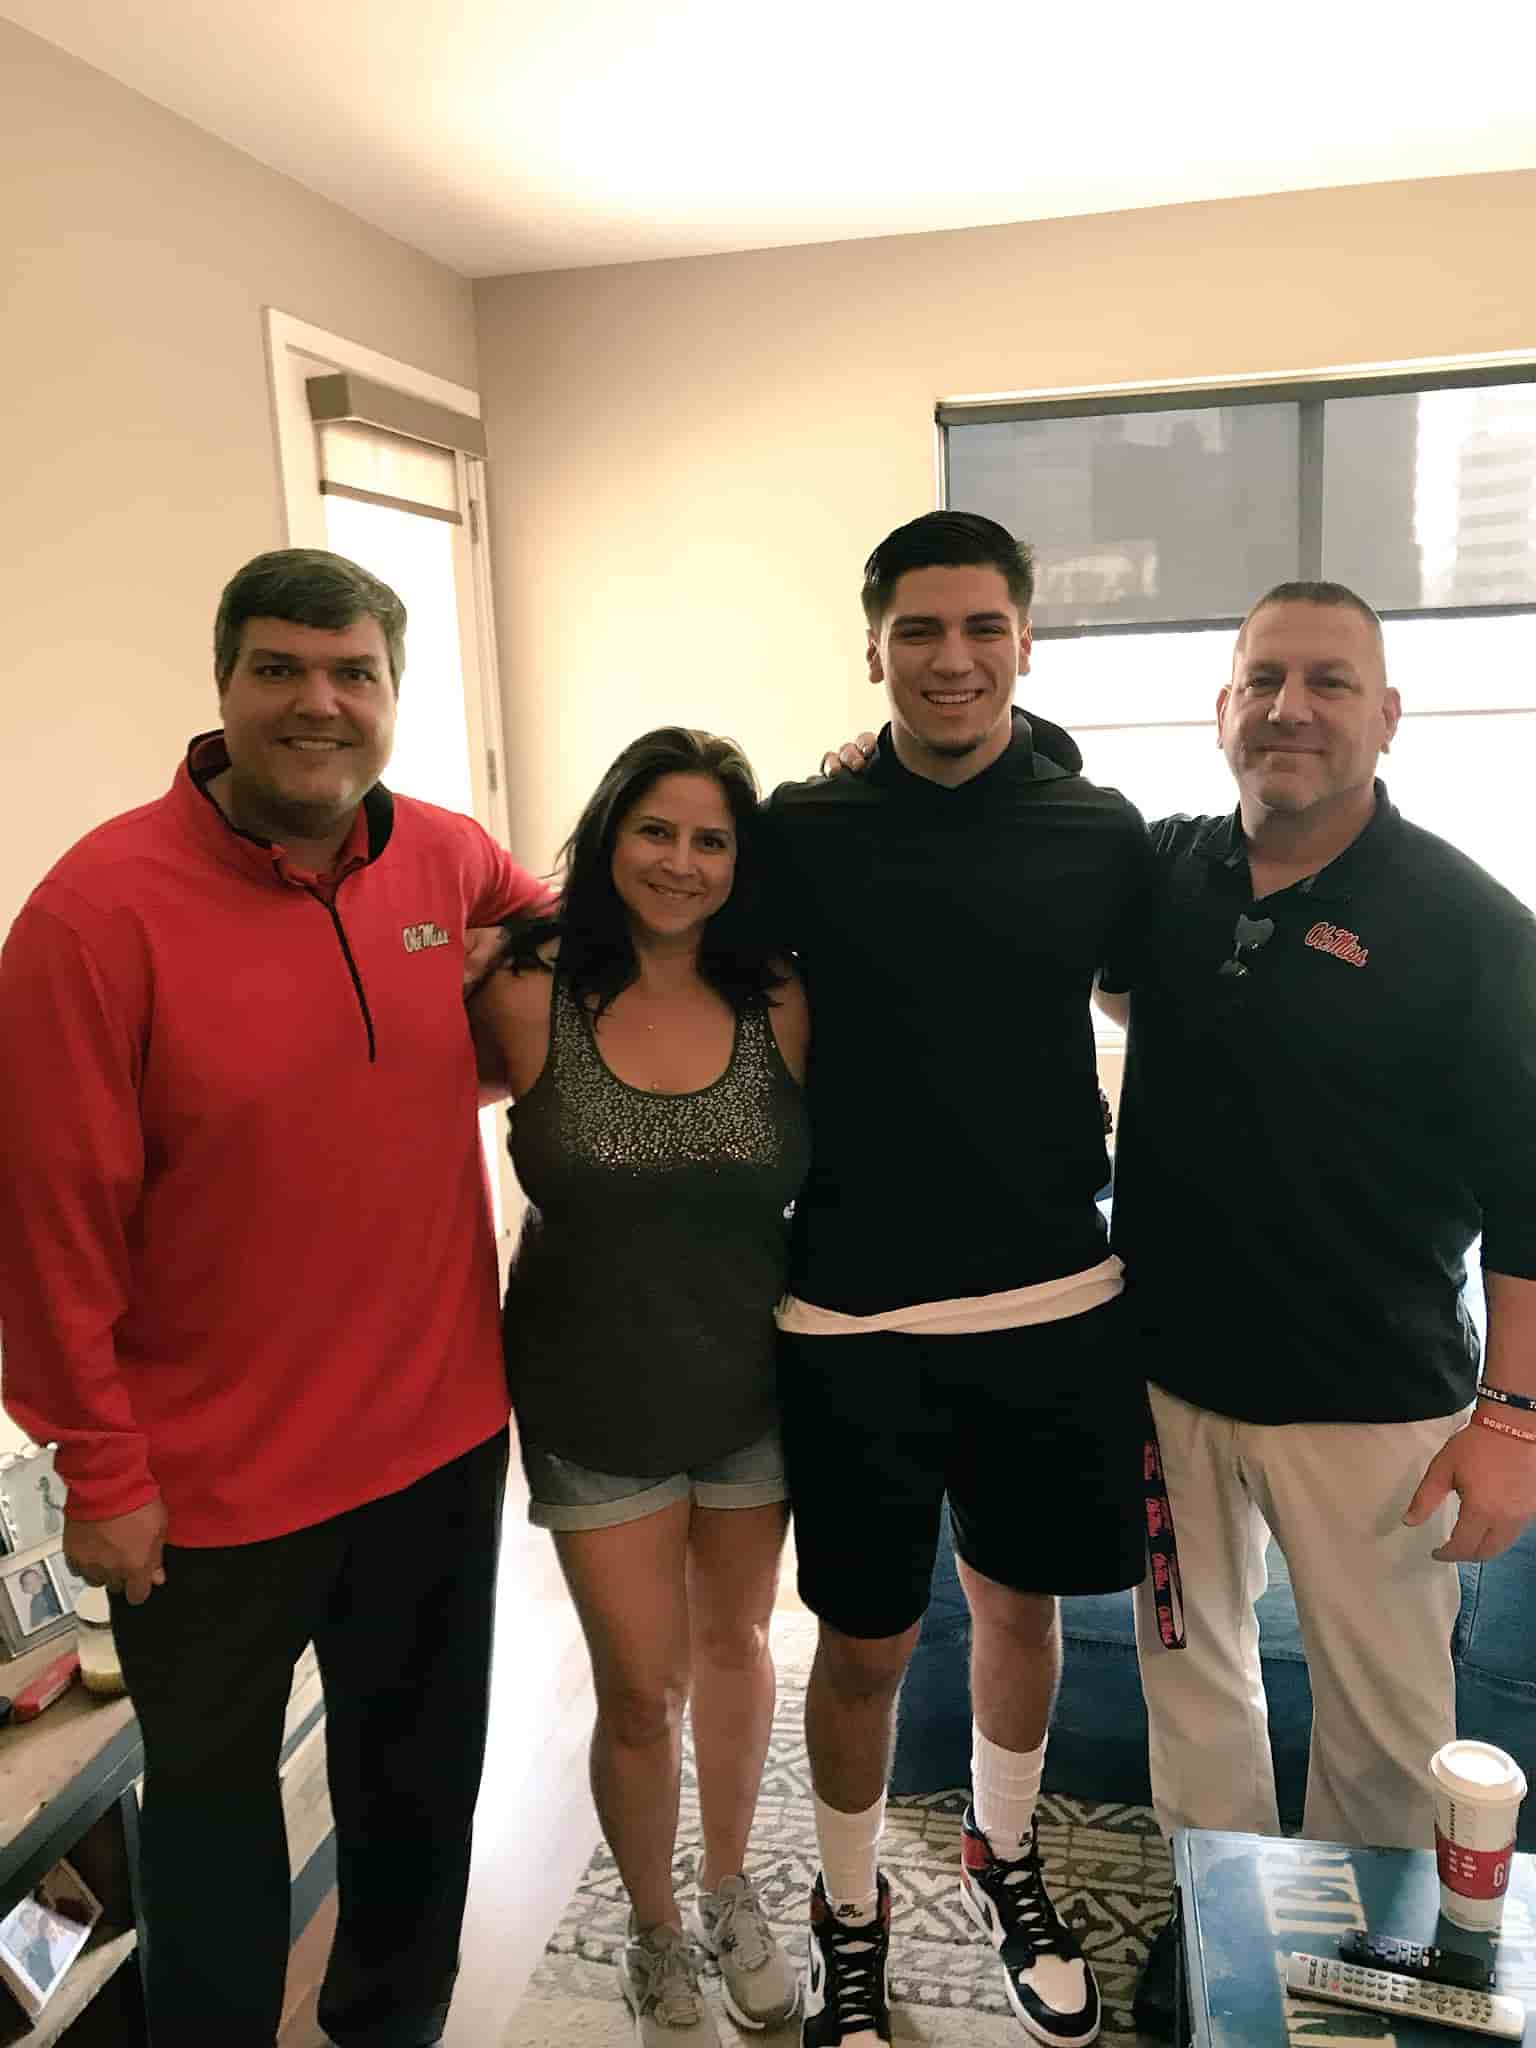 Image of Matt Corral with his family